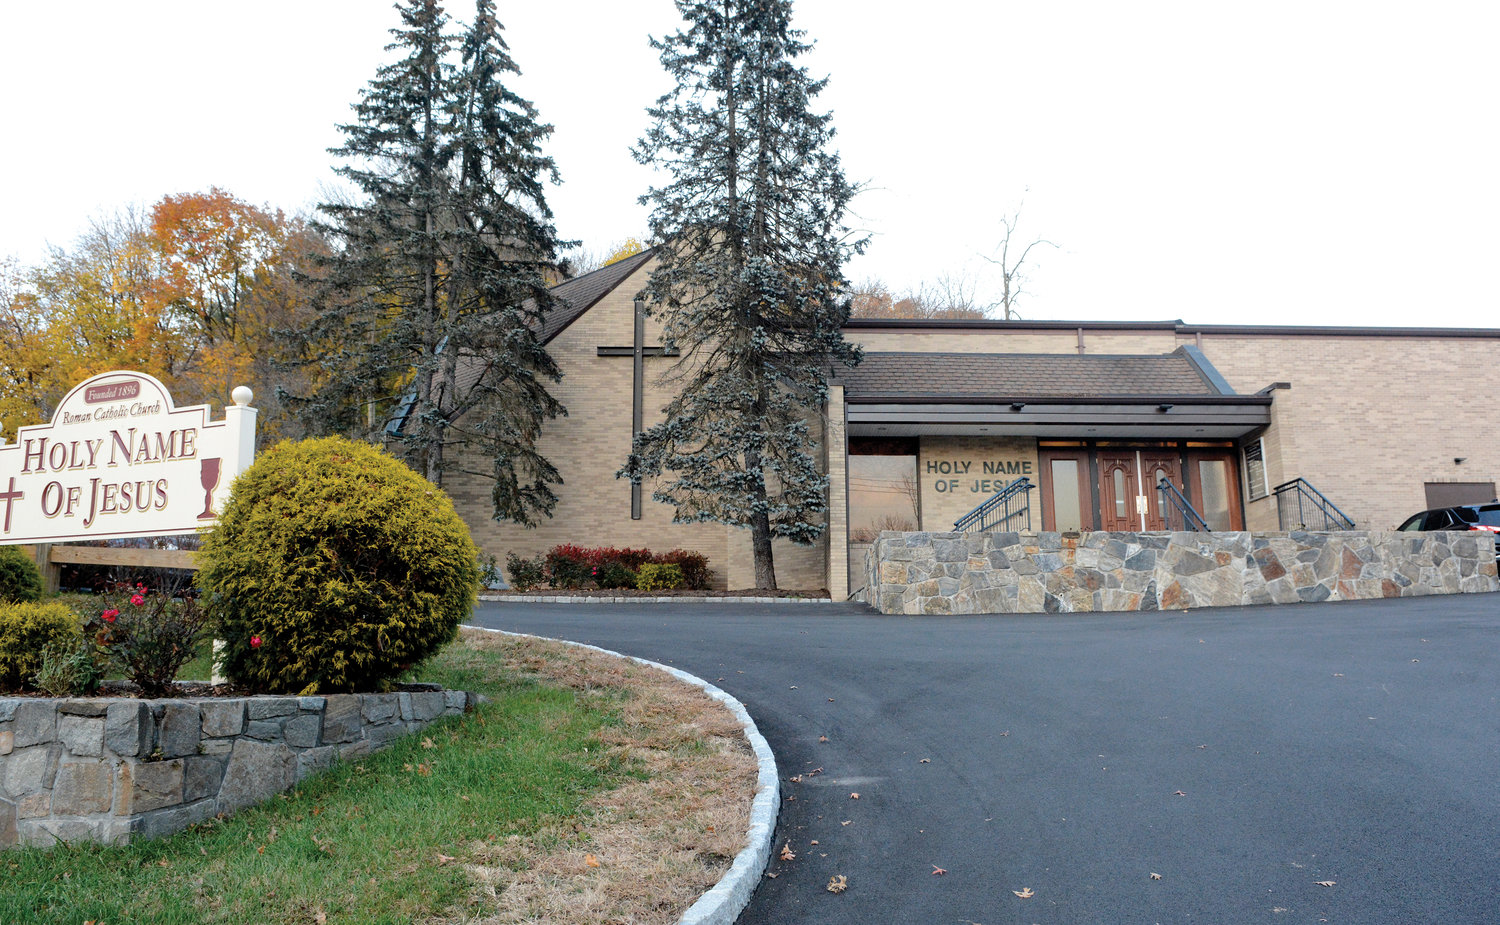 The current church was dedicated in 1979.